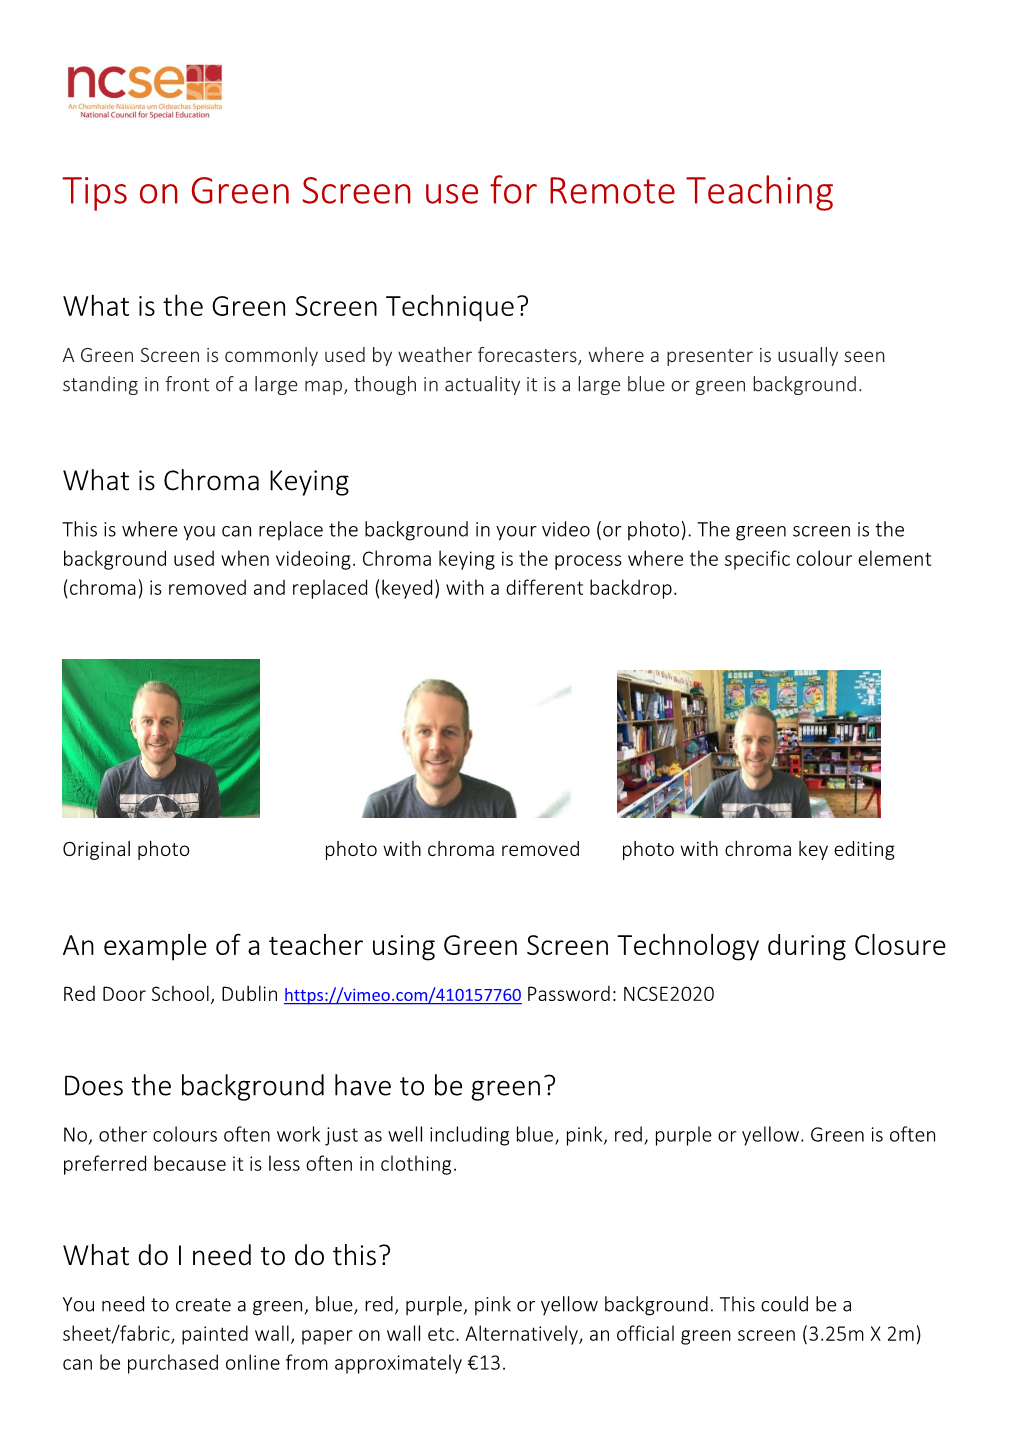 Tips on Green Screen Use for Remote Teaching